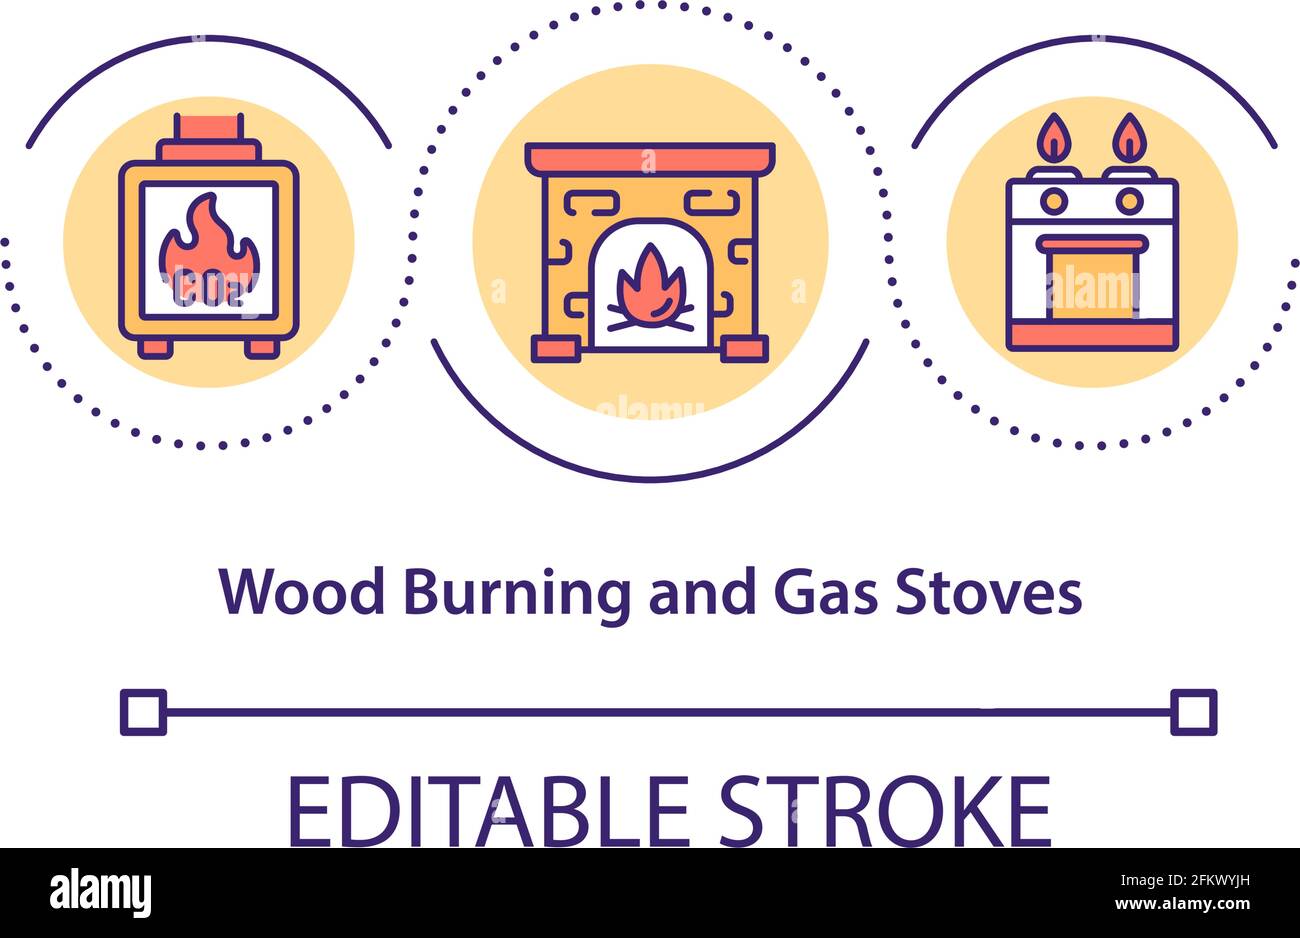 Wood burning and gas stoves concept icon Stock Vector